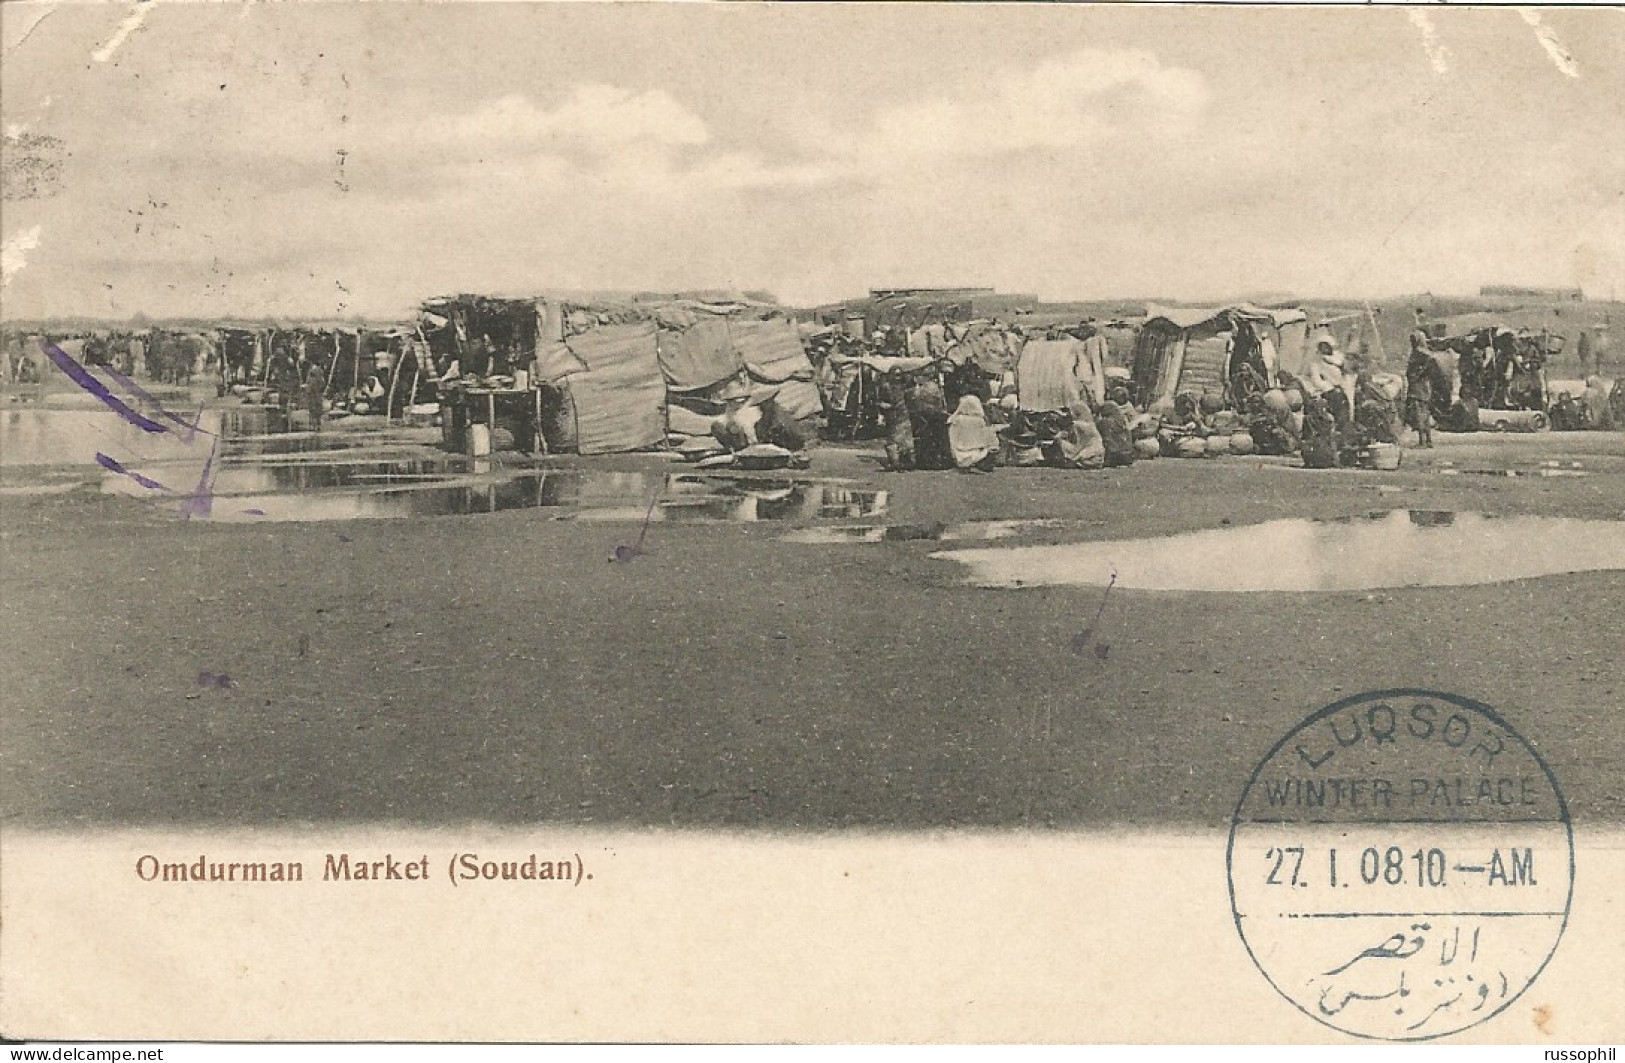 SUDAN - 1 MIL. FRANKING ON PC (VIEW OF OMDURMAN MARKET) TO THE POSTMASTER AT THE WINTER PALACE IN LUQSOR - 1908 - Soedan (...-1951)